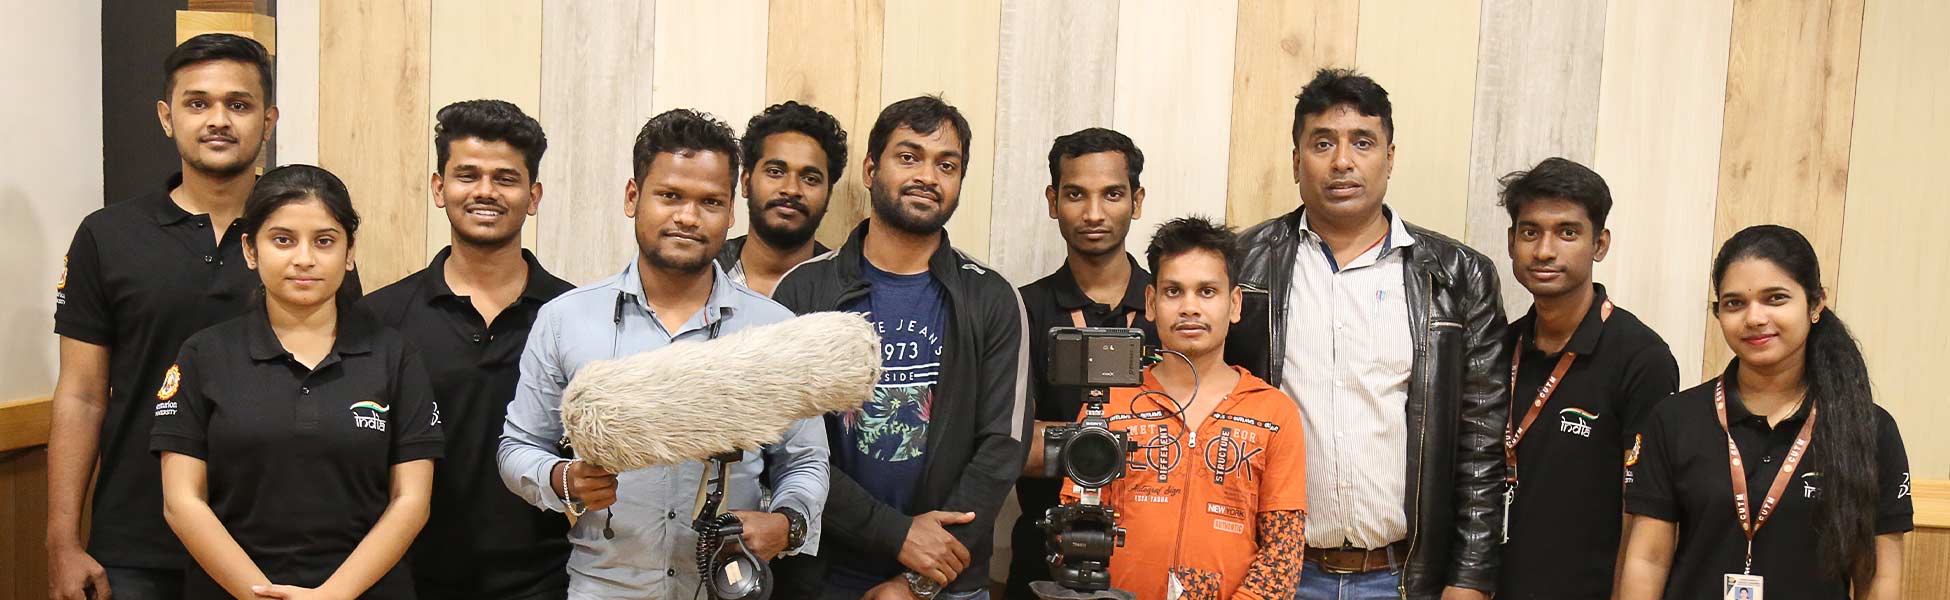 film production services in ghaziabad, video production services in ghaziabad, tv production services in ghaziabad, production services in ghaziabad